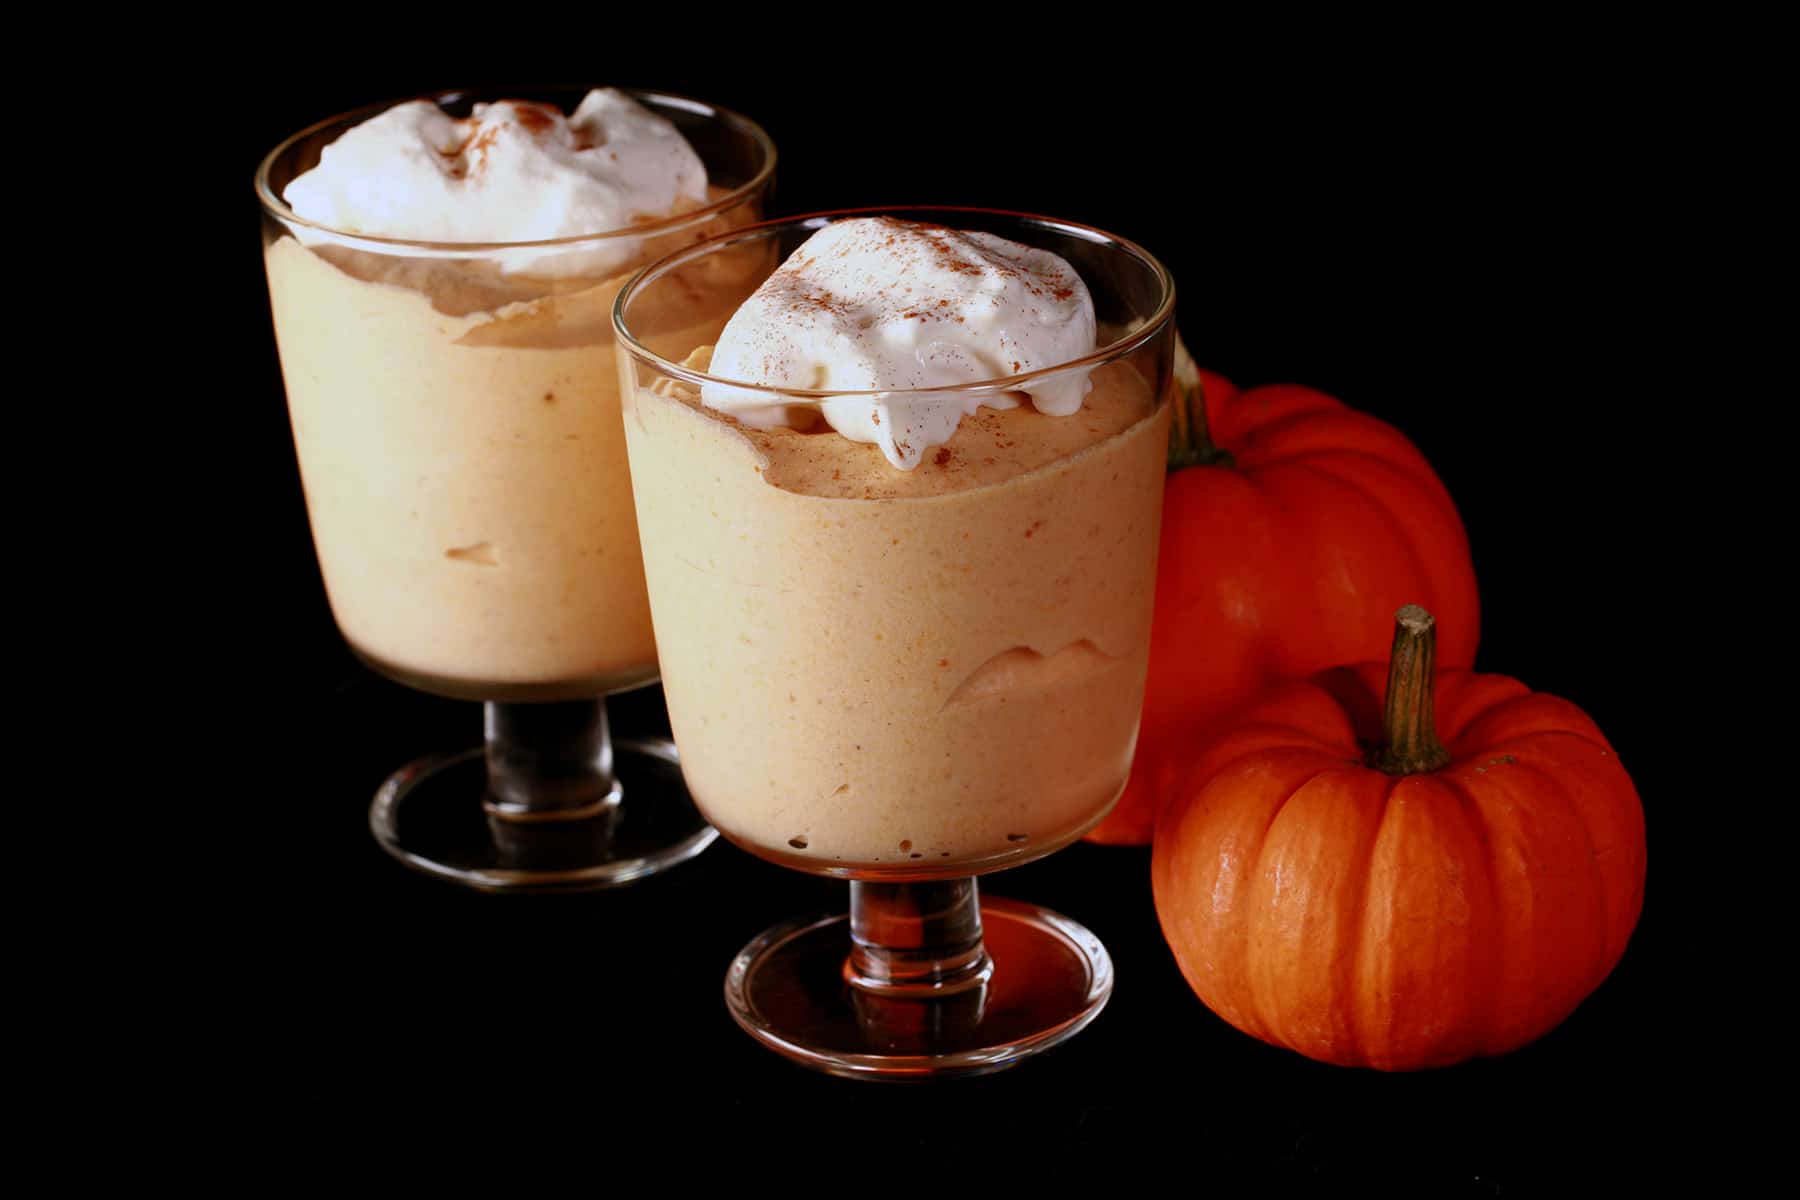 Two glasses with traditional maple pumpkin mousse in them. They are topped with whipped cream and a sprinkle of cinnamon.